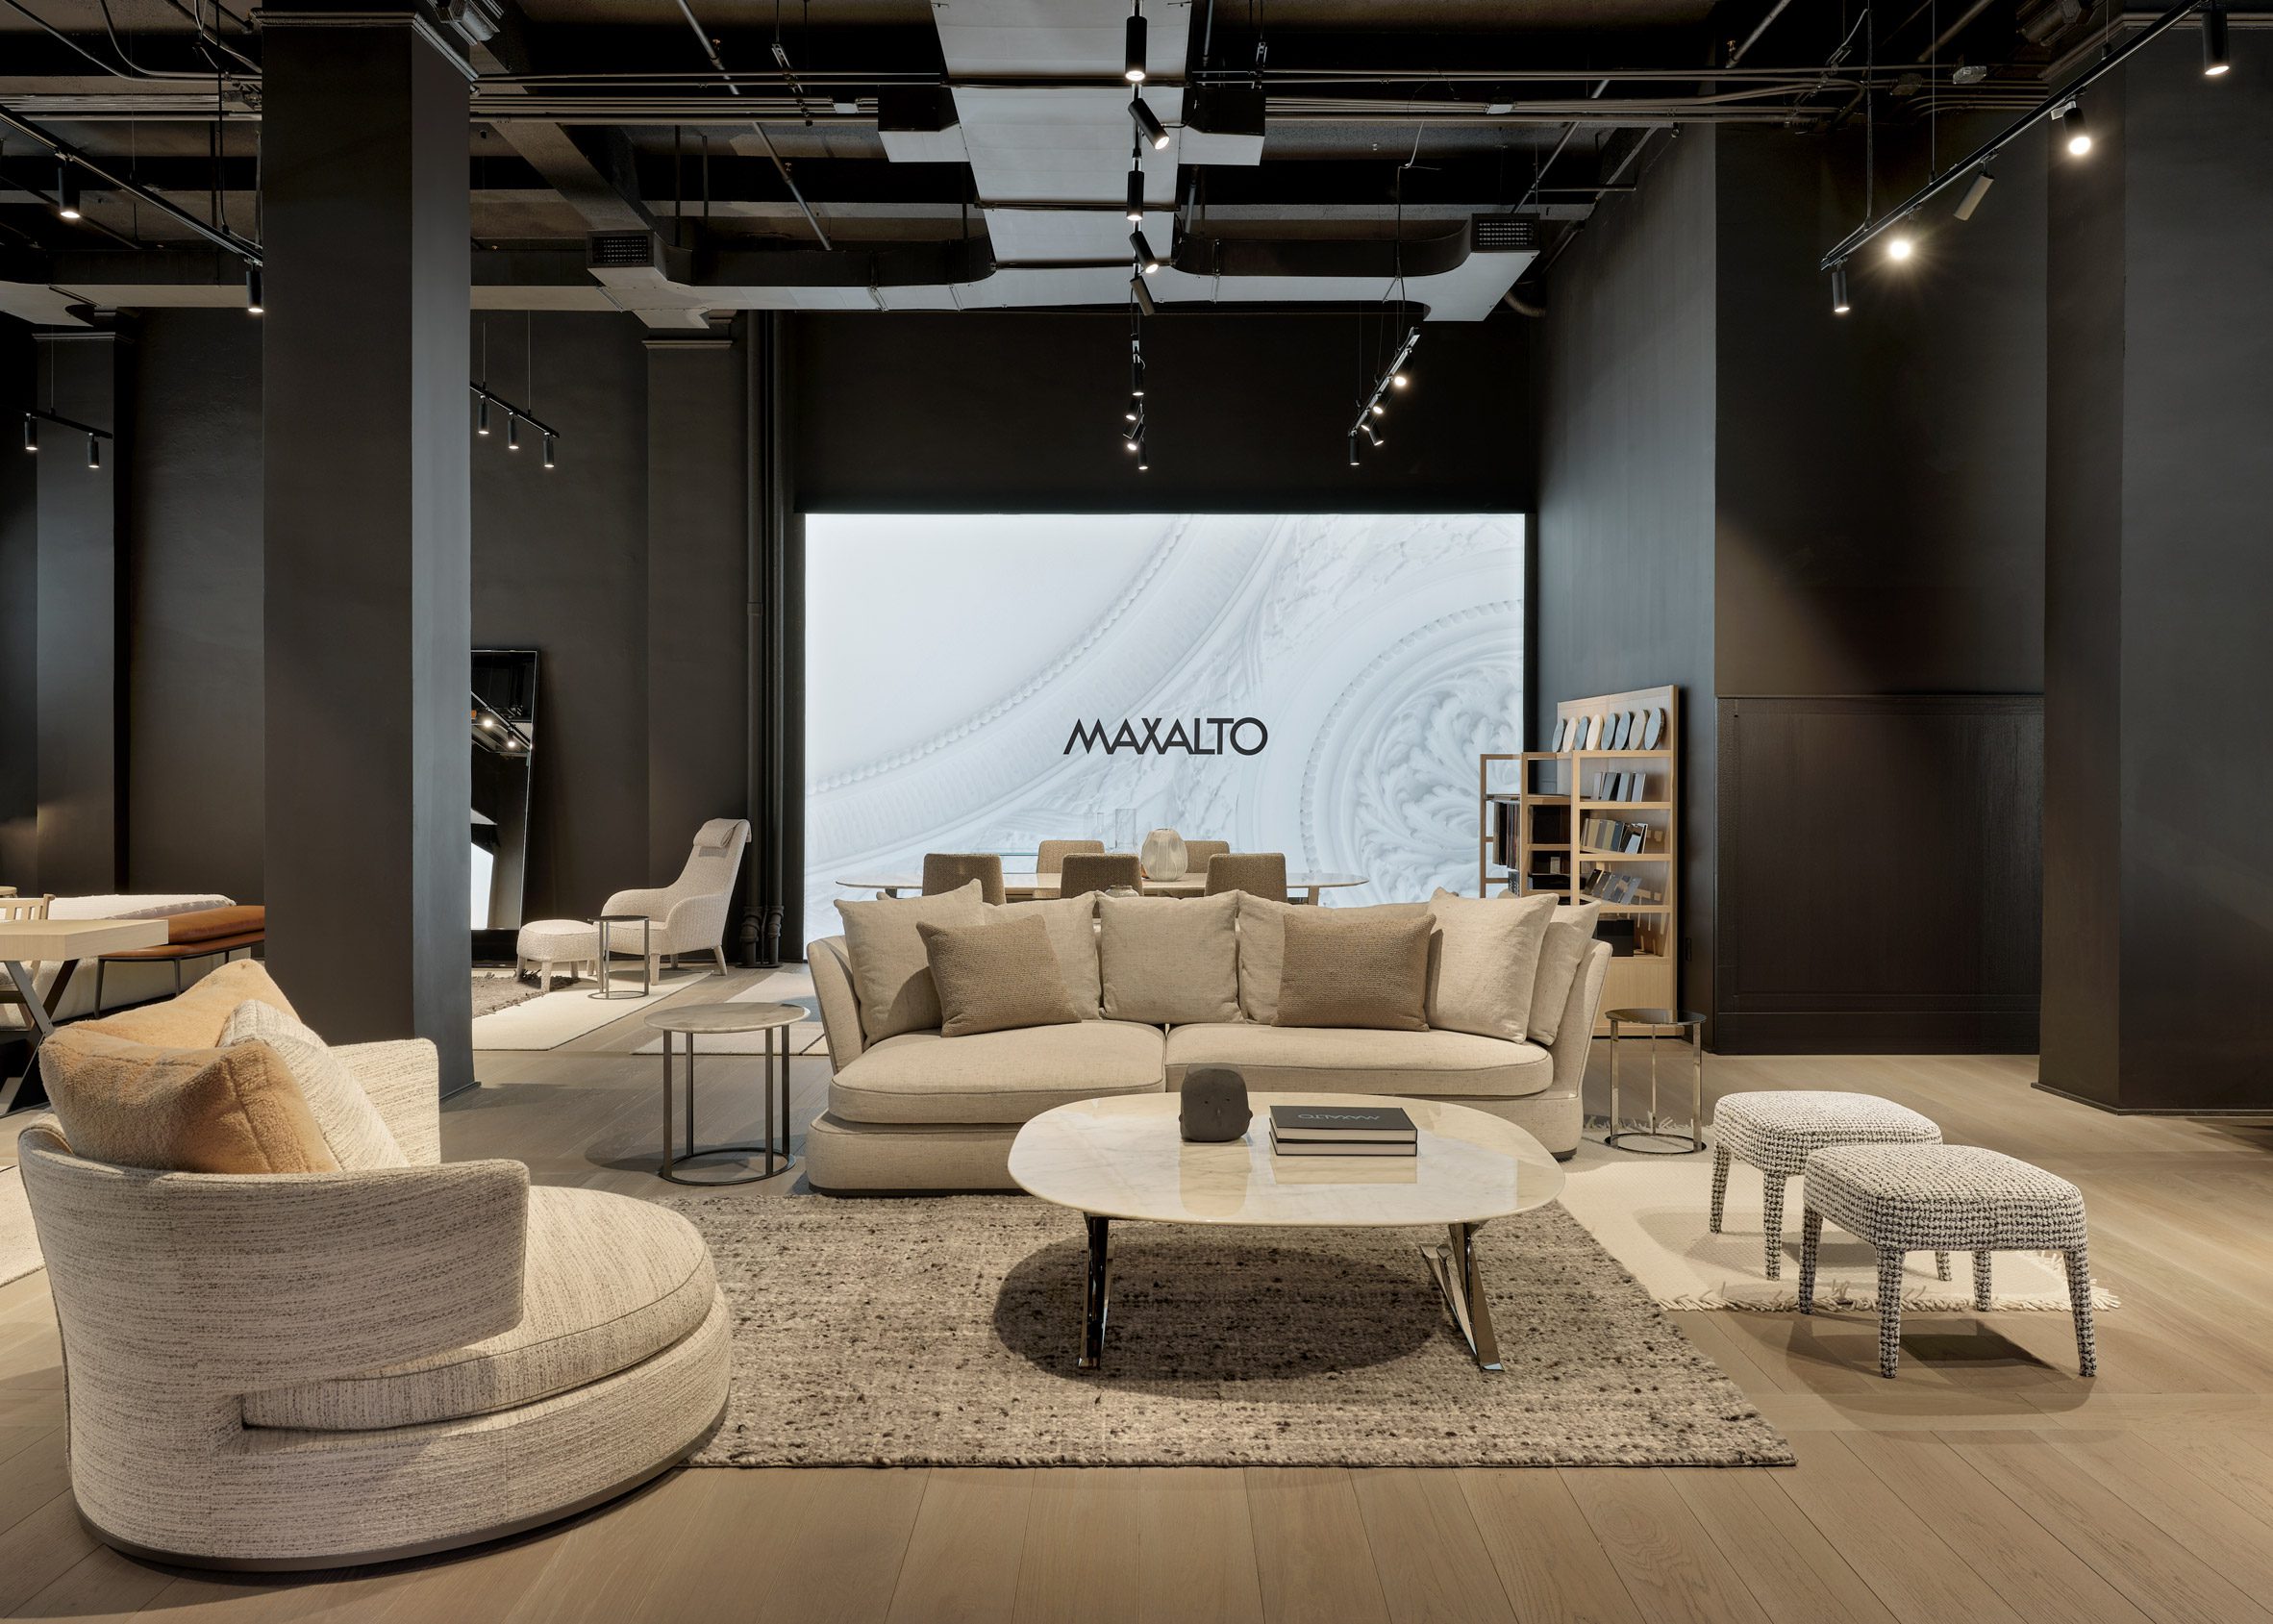 A show room with white furniture